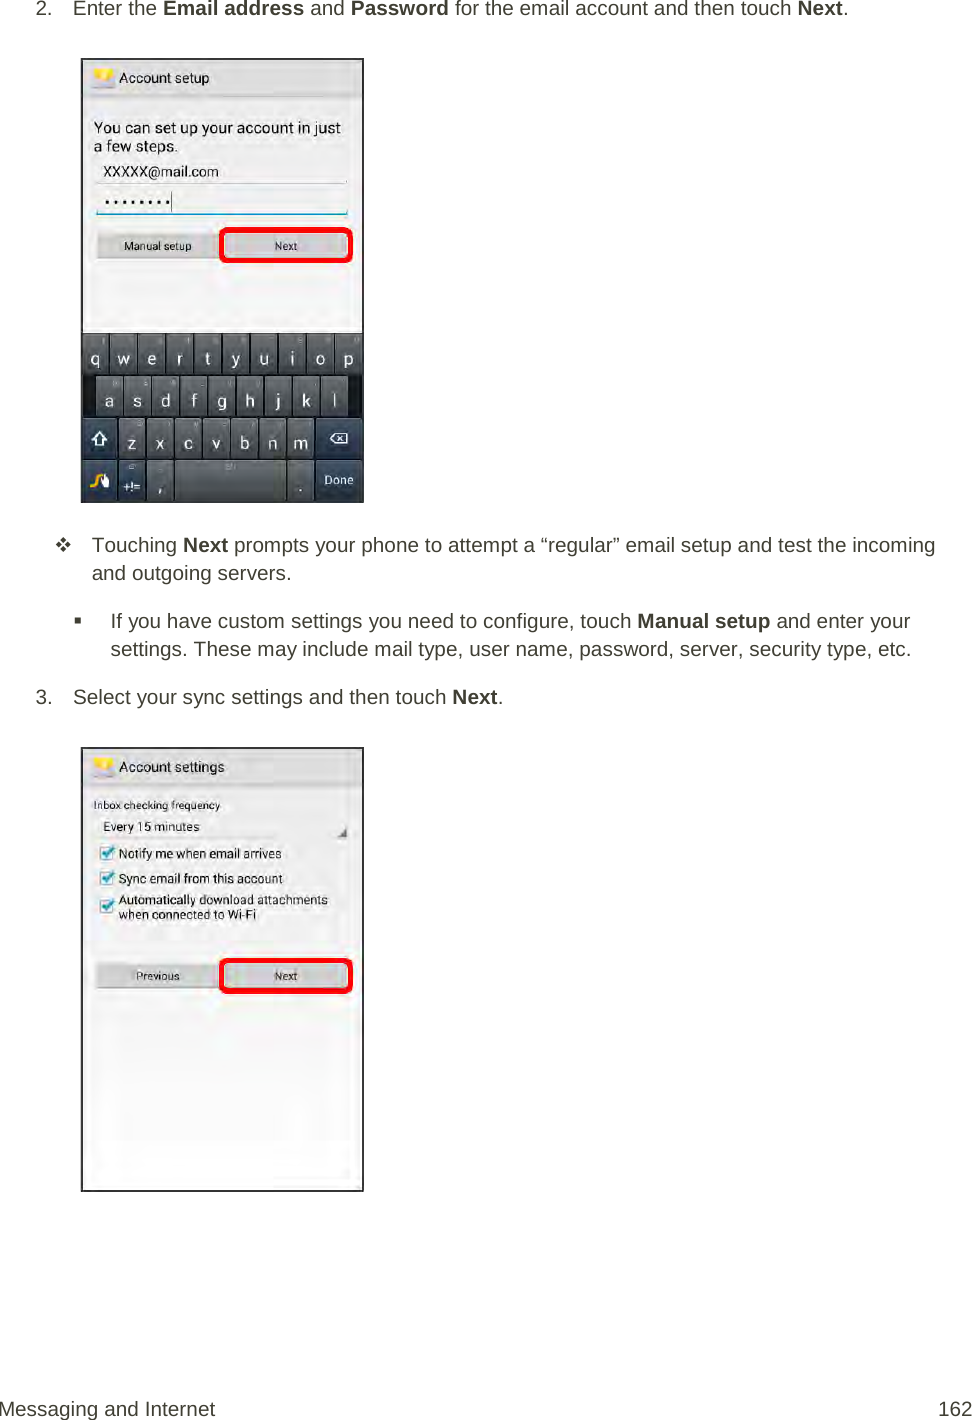 2. Enter the Email address and Password for the email account and then touch Next.    Touching Next prompts your phone to attempt a “regular” email setup and test the incoming and outgoing servers.   If you have custom settings you need to configure, touch Manual setup and enter your settings. These may include mail type, user name, password, server, security type, etc. 3. Select your sync settings and then touch Next.    Messaging and Internet 162 